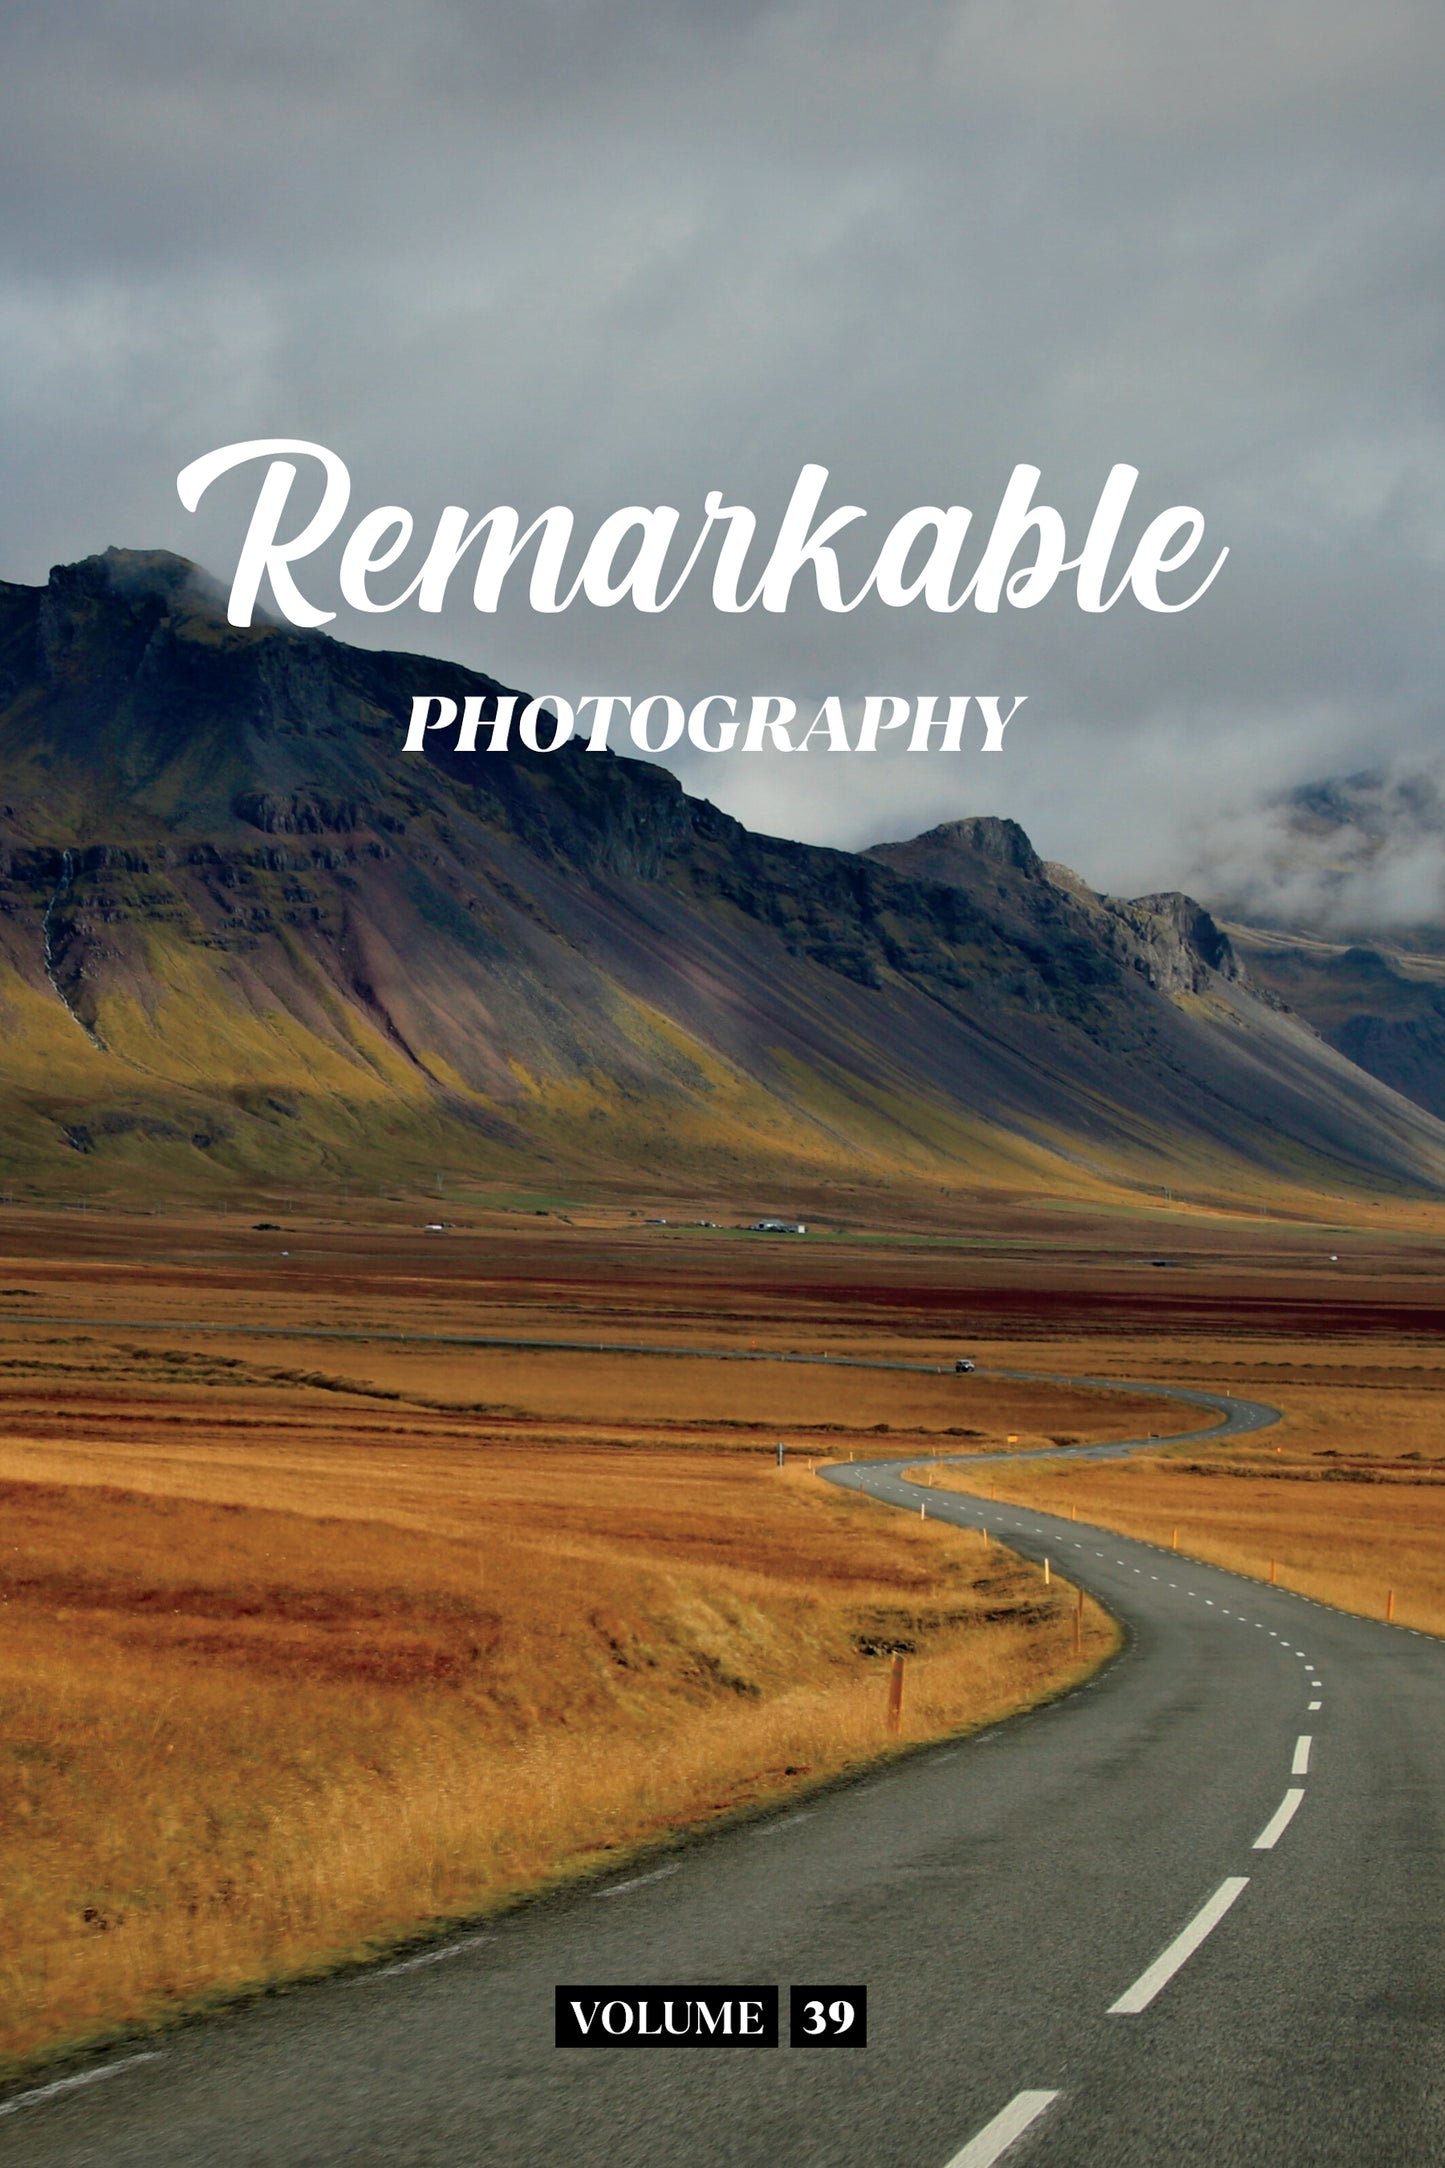 Remarkable Photography Volume 39 (Physical Book Pre-Order)